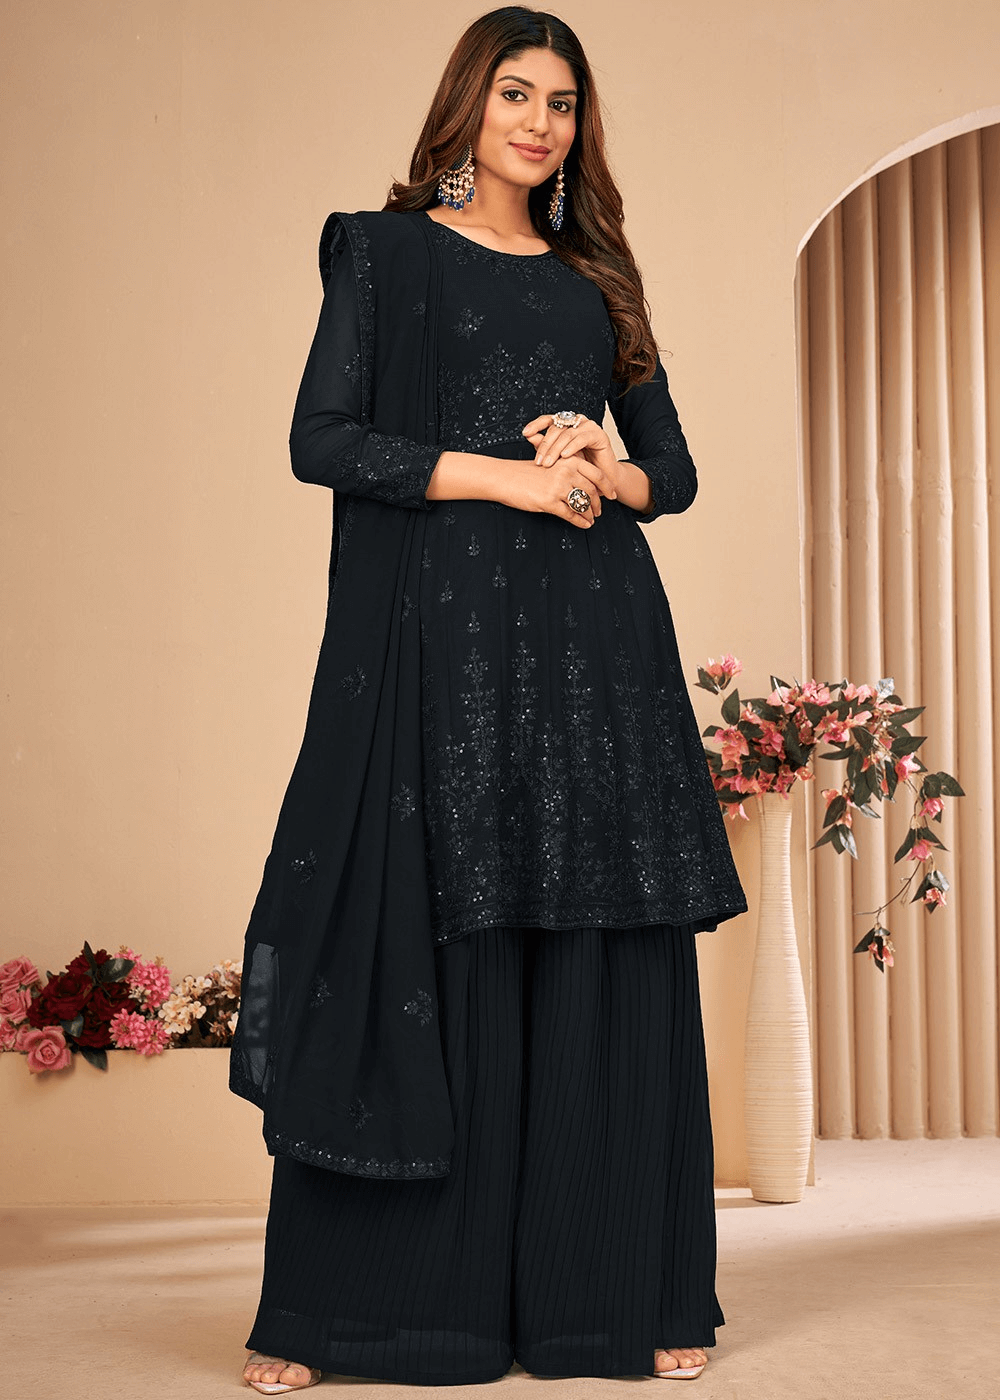 Cape Style Sharara Suit